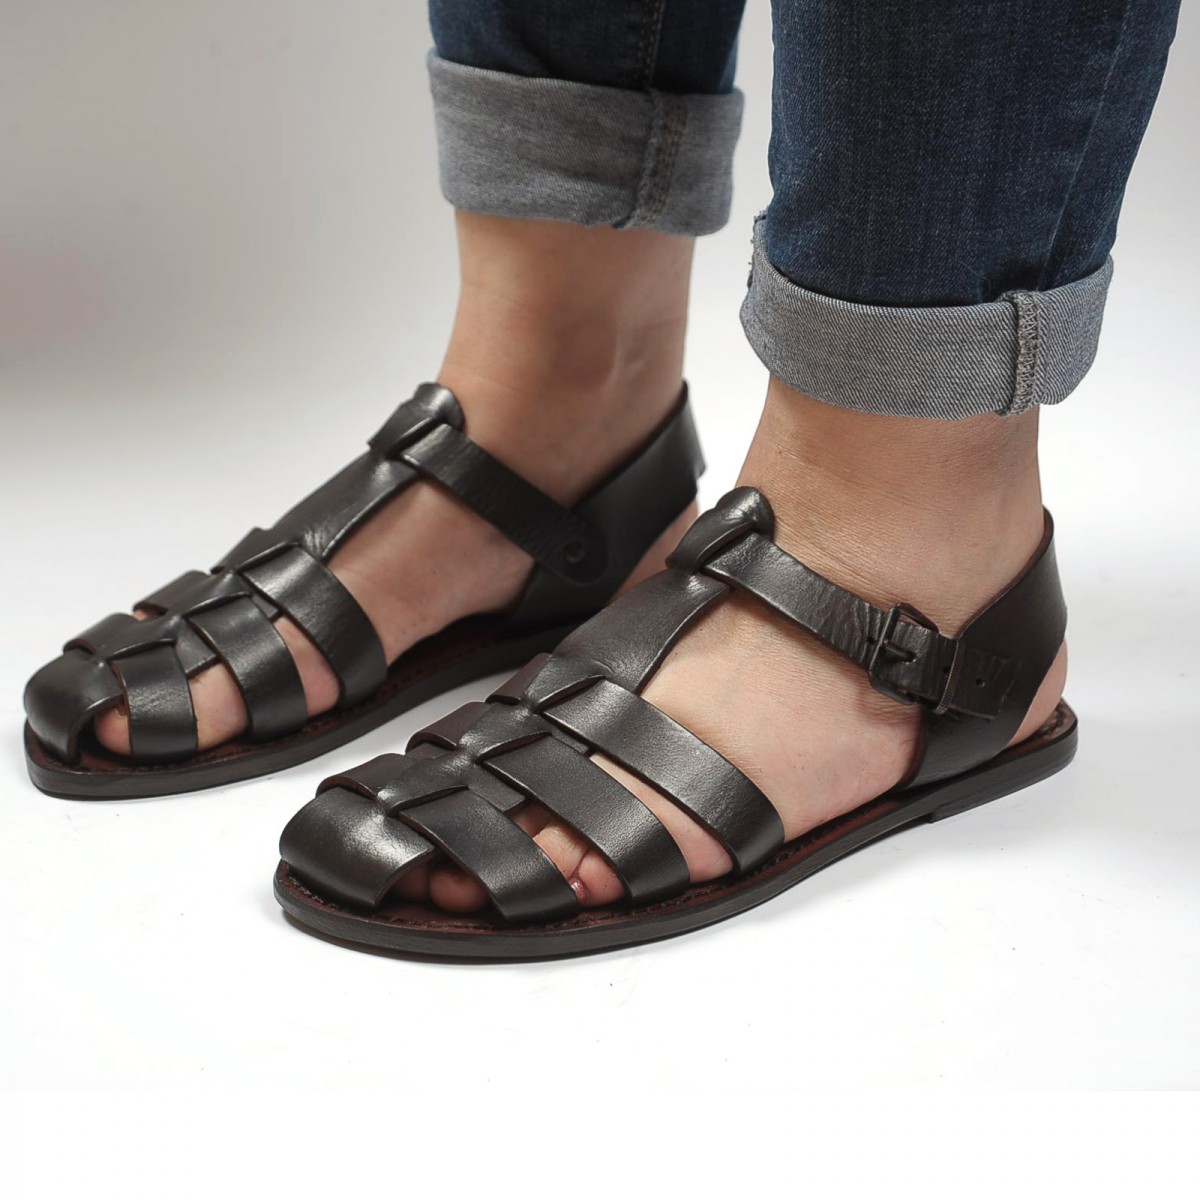 Dark brown flat  sandals  for women real leather  Handmade in 